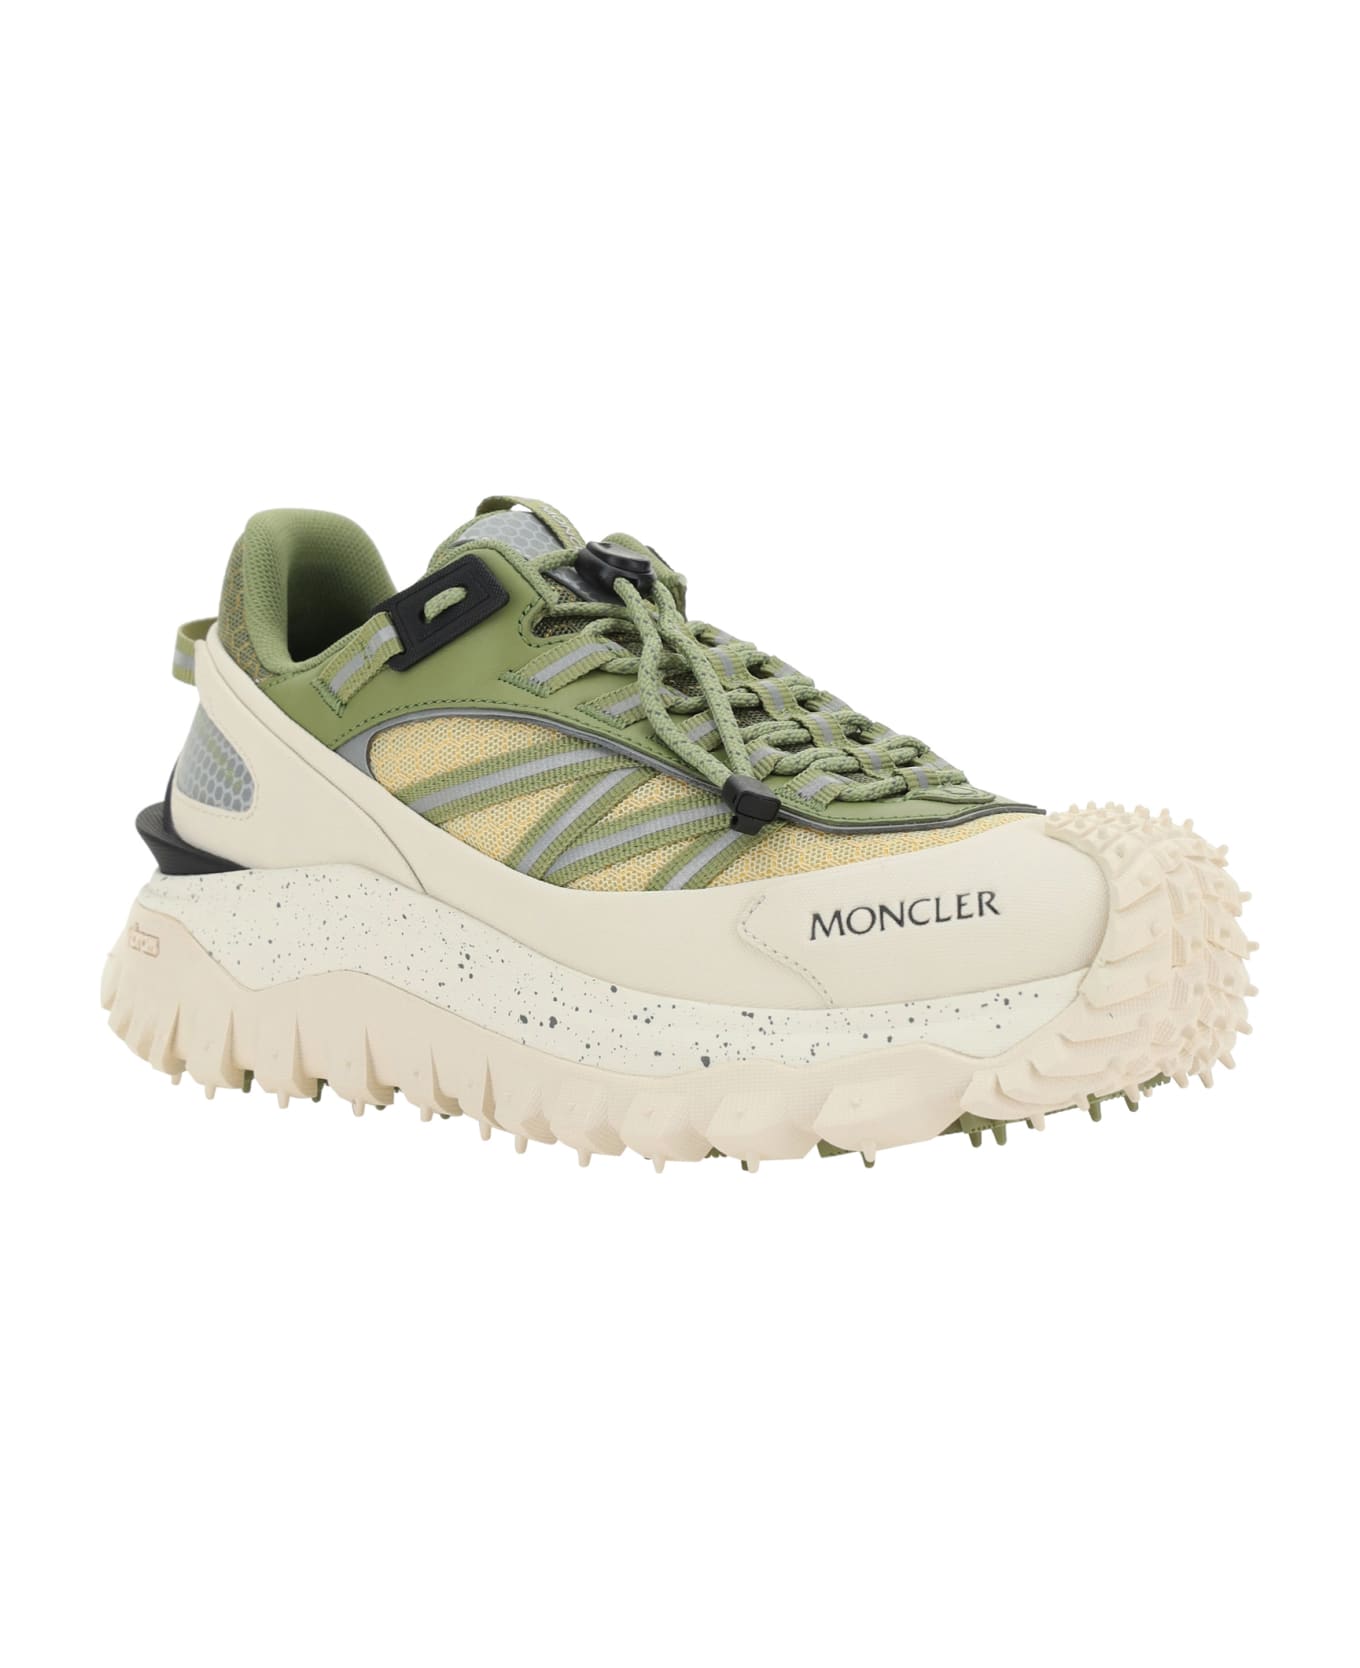 Moncler Trailgrip Sneakers - 21i